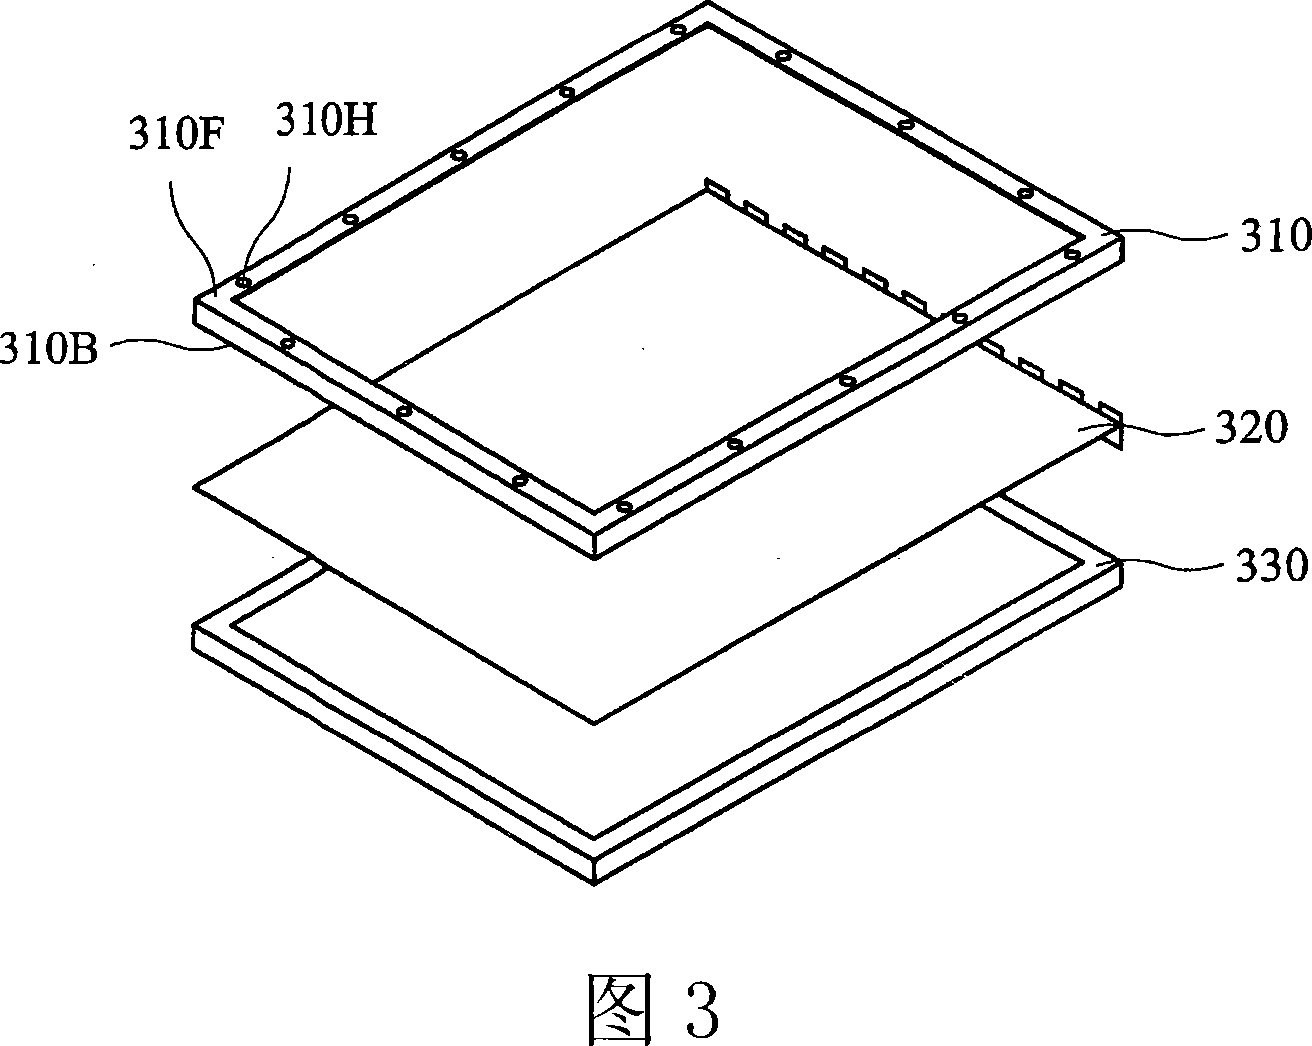 LCD and backlight module structure, front frame and back board thereof, and manufacturing method thereof